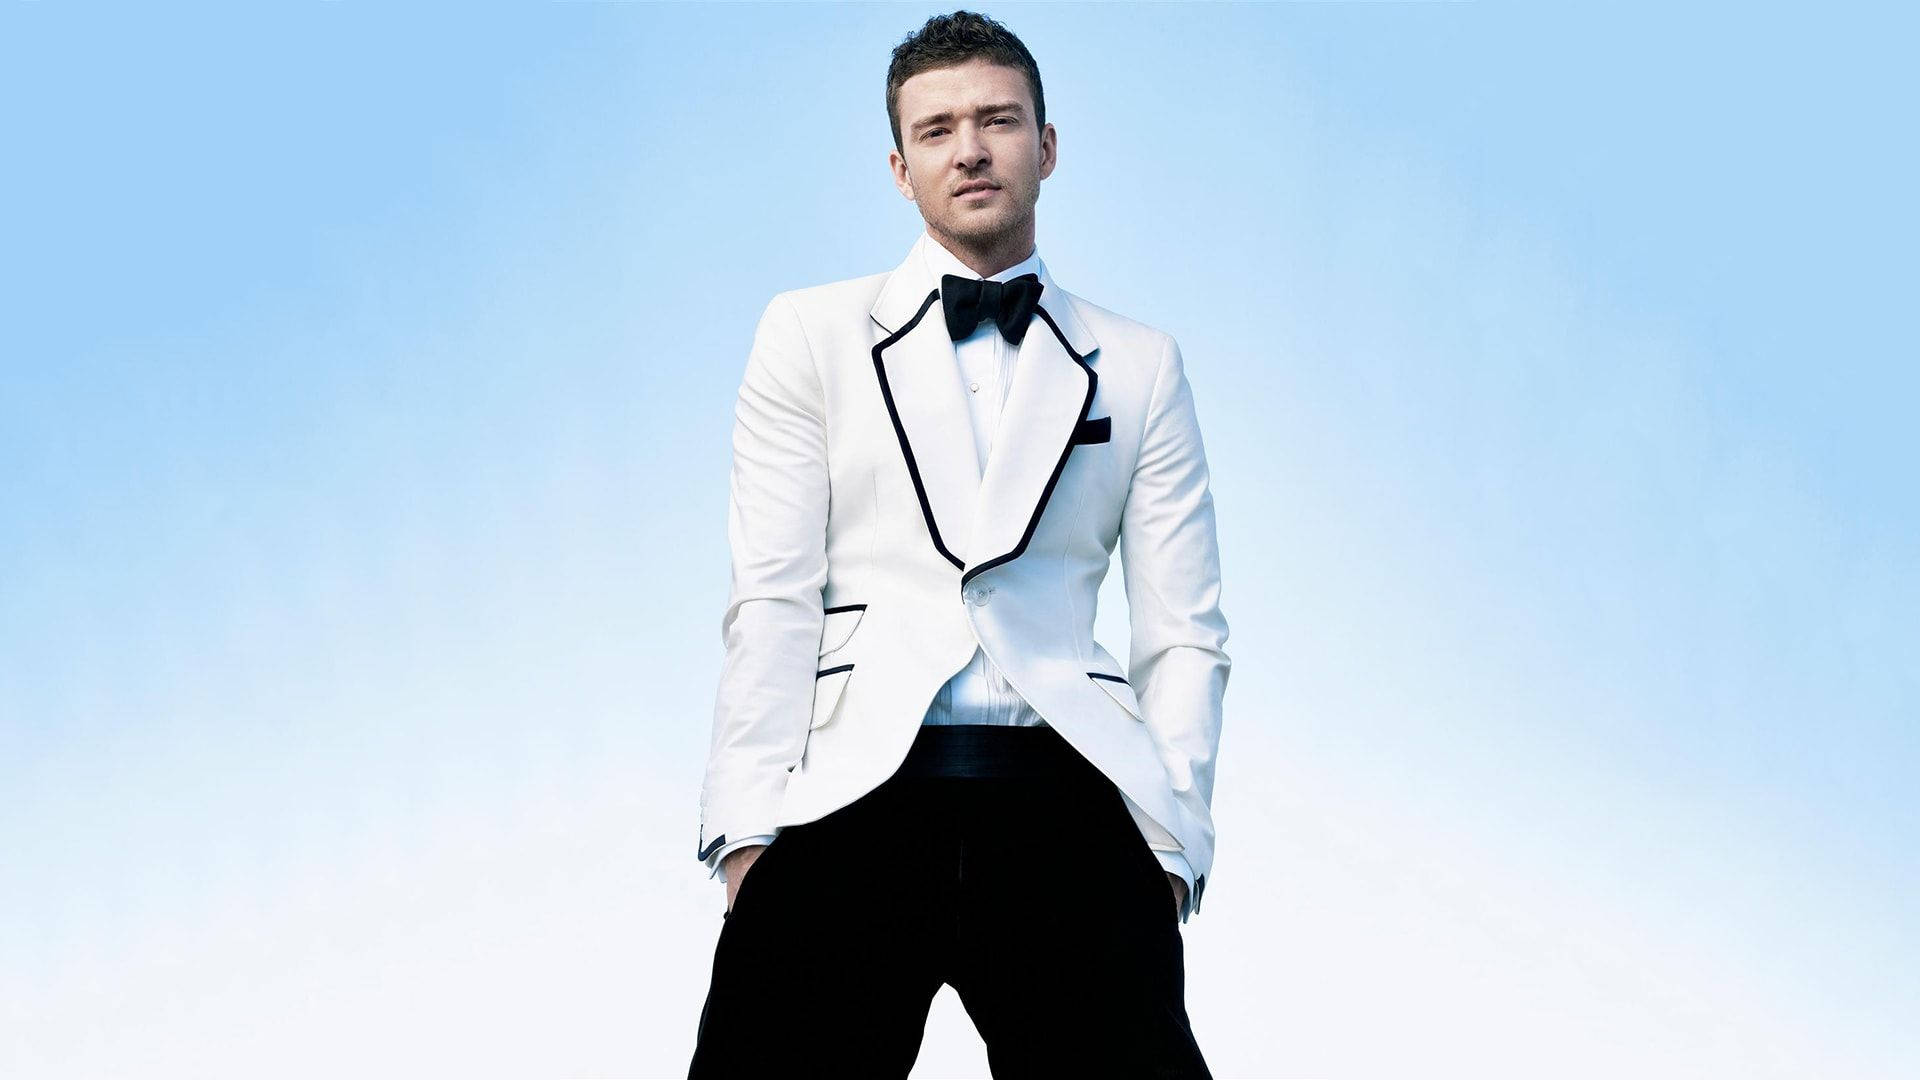 Justintimberlake I Vit Rock. (this Would Be A Suitable Description For A Computer Or Mobile Wallpaper Featuring Justin Timberlake In A White Coat.) Wallpaper